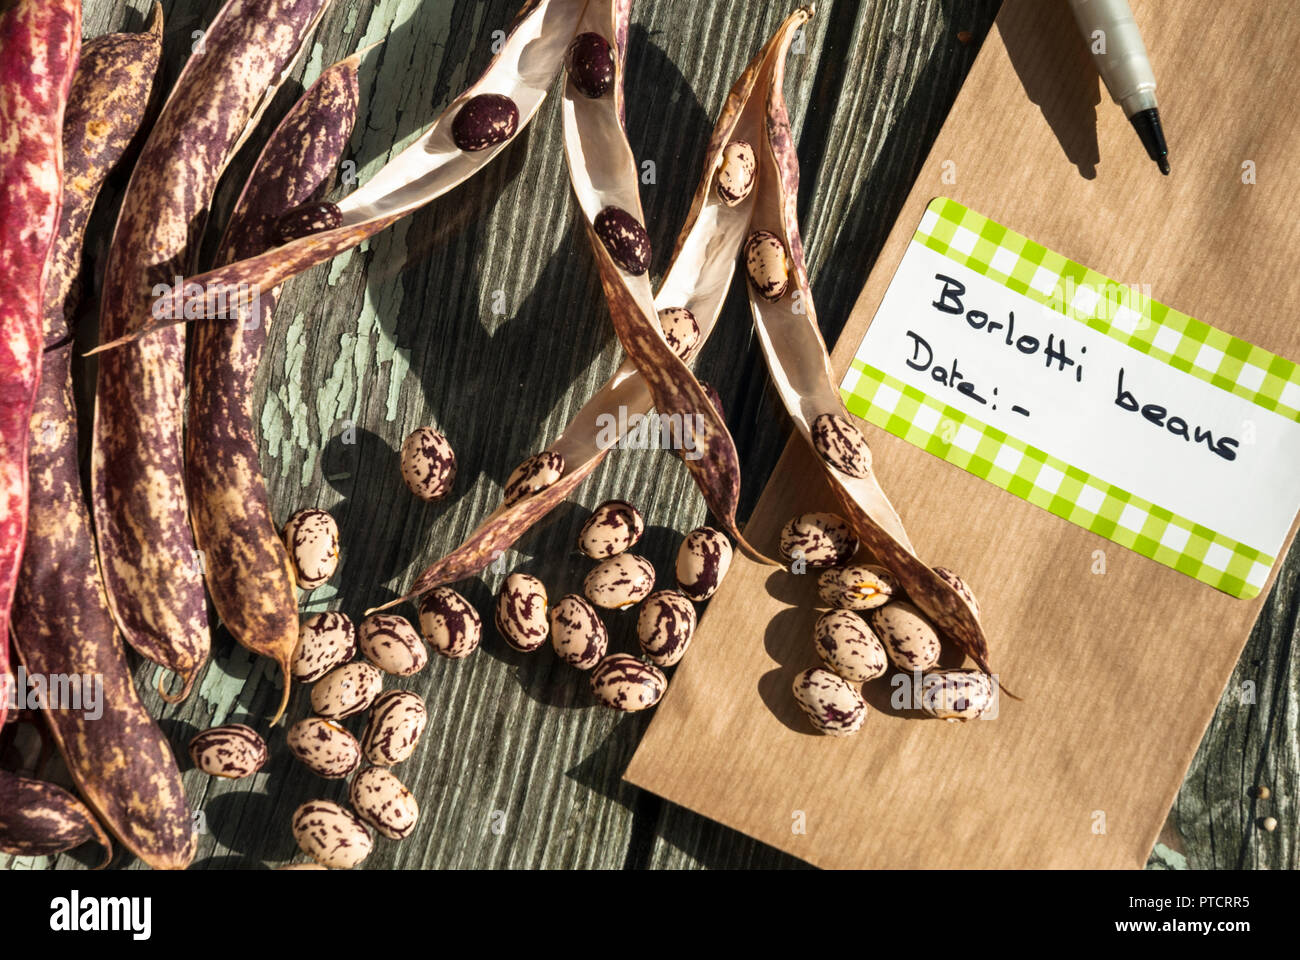 Borlotti beans and pods showing how to save in packets for next seasons germination and planting. Stock Photo